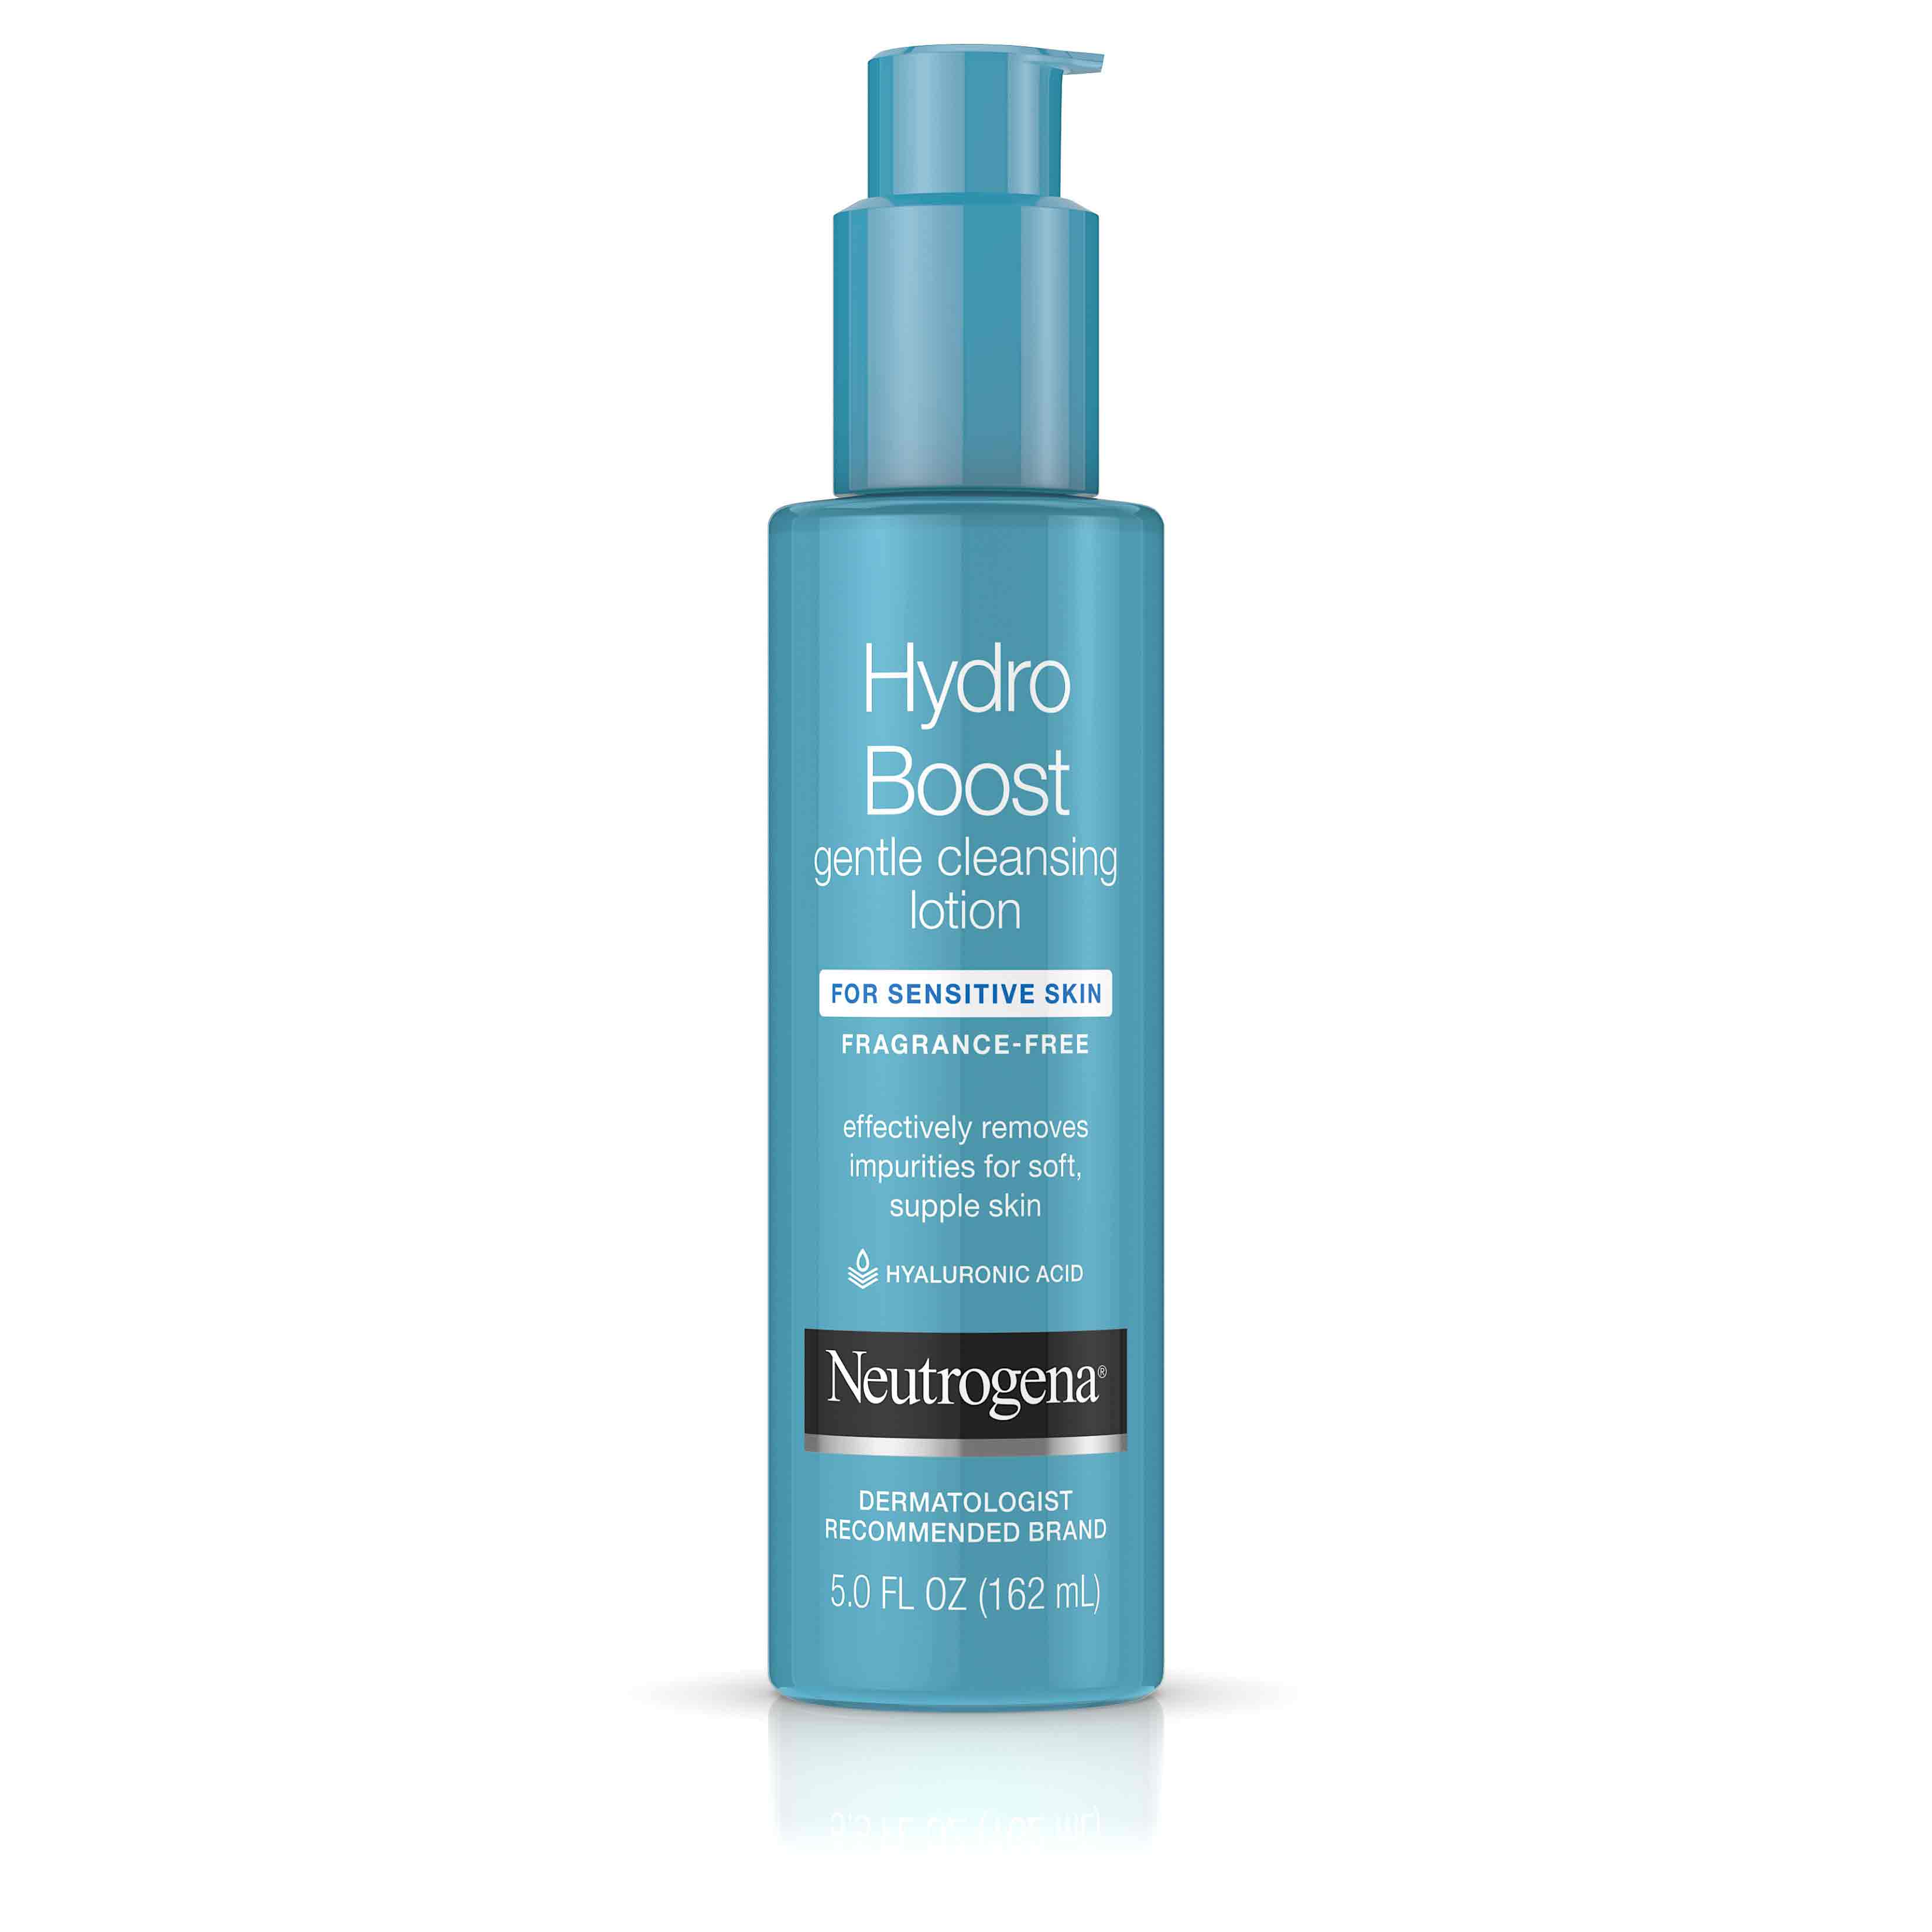 Neutrogena® Hydro Boost Gentle Cleansing Lotion—Fragrance Free